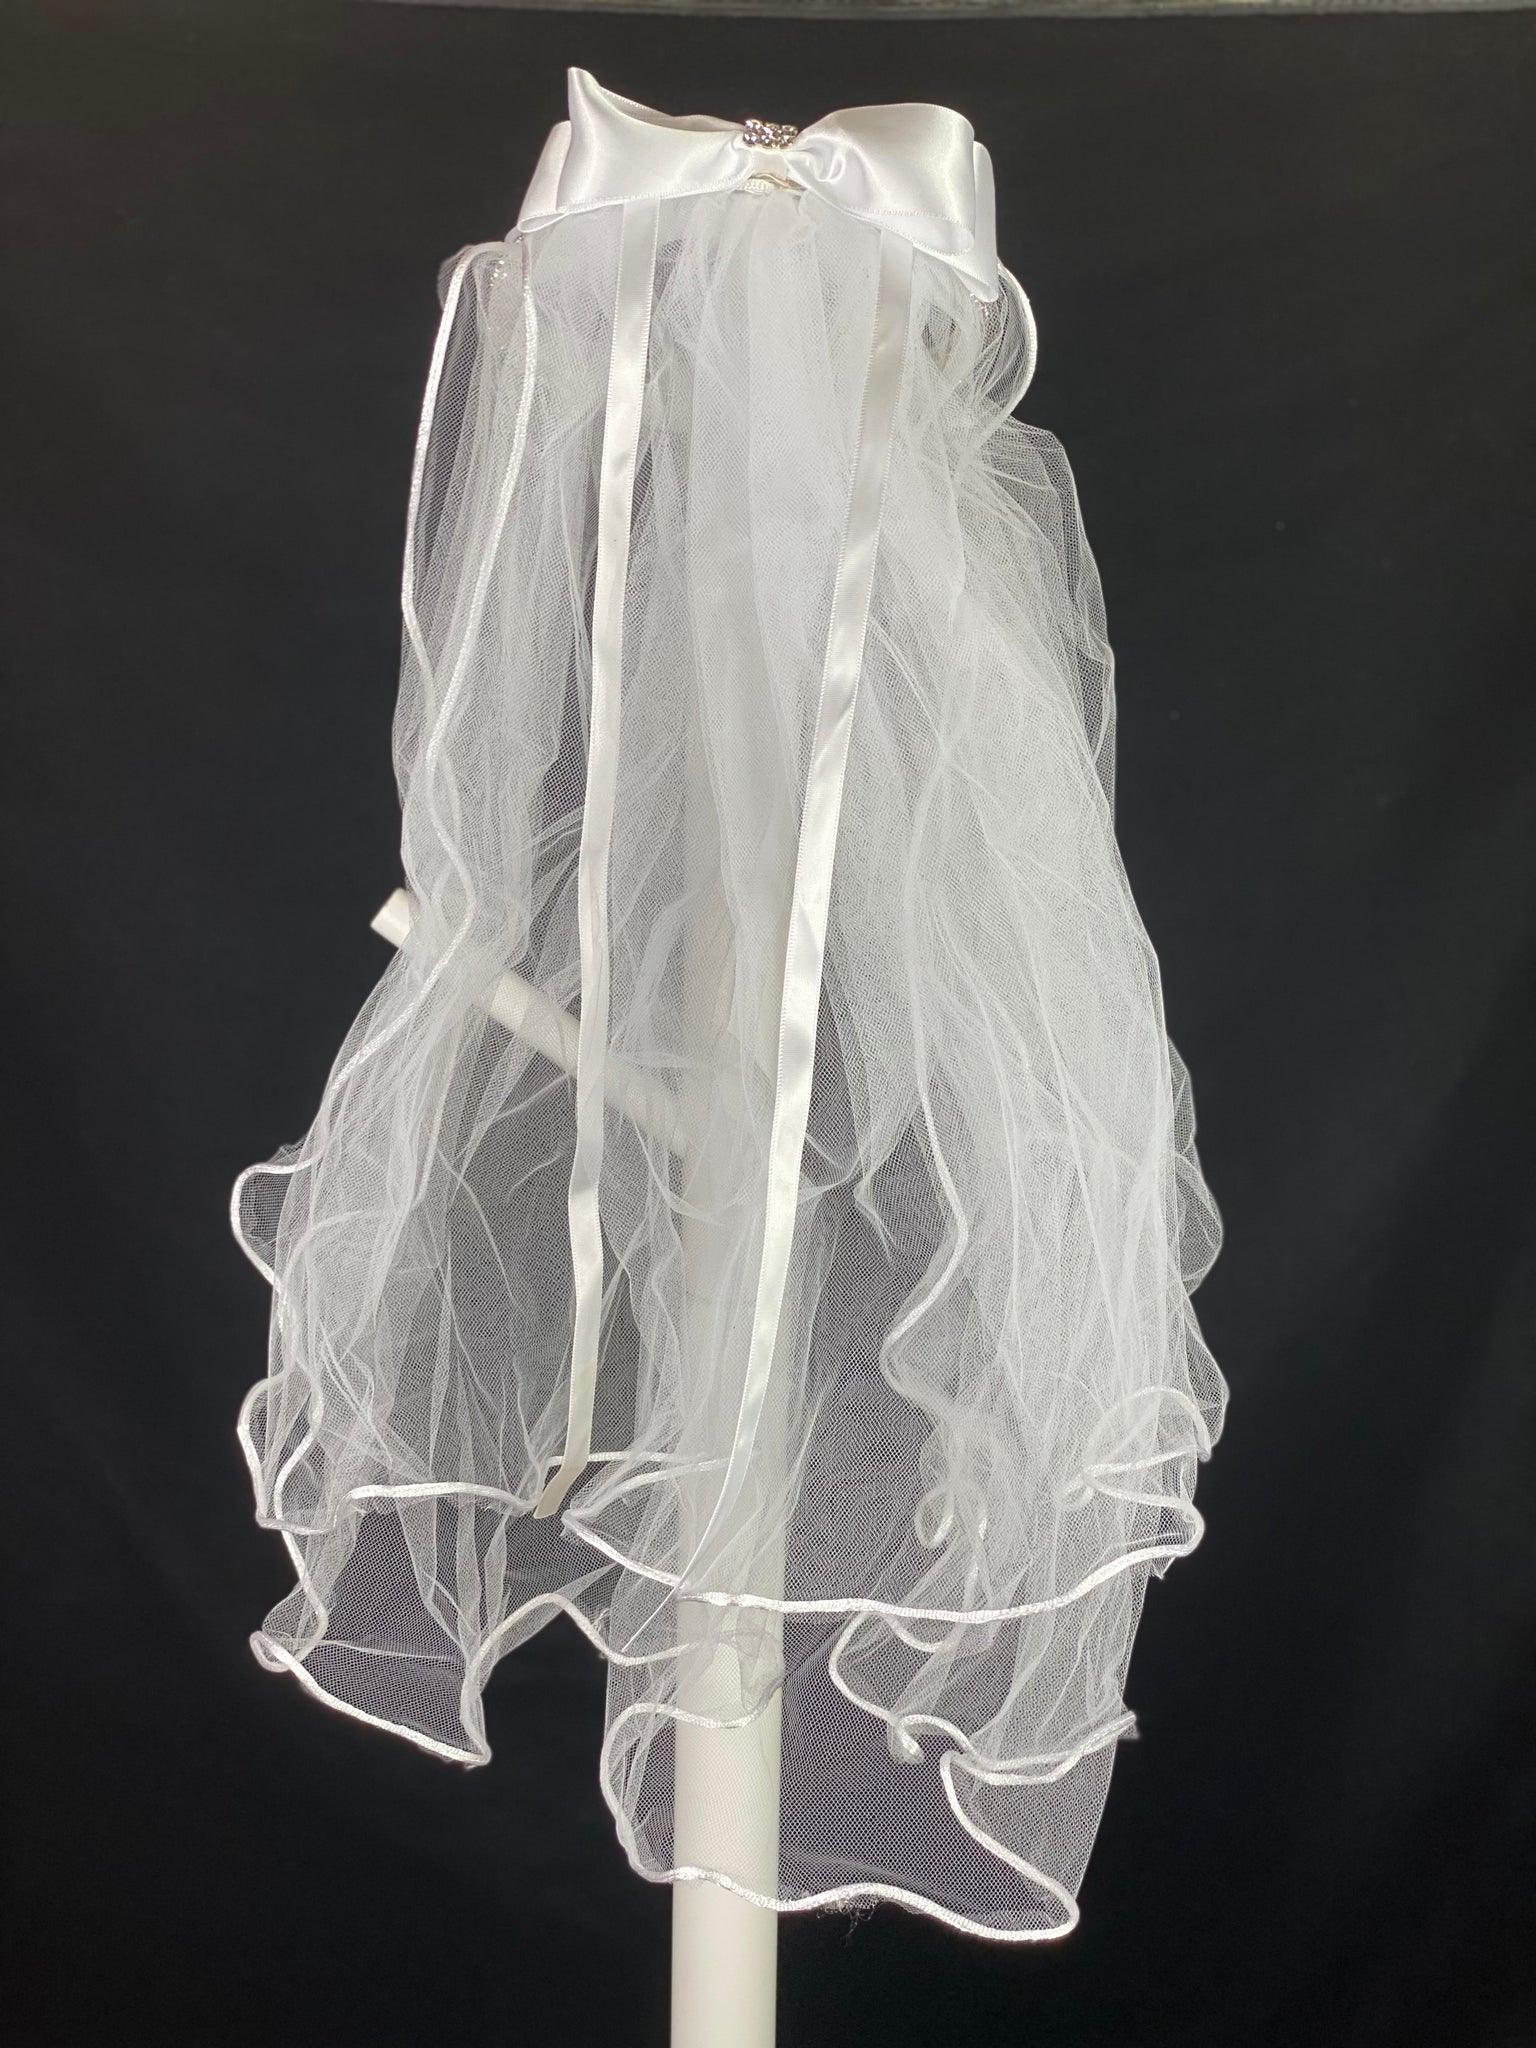 Elegant soft 2 layer tulle veil with delicate hand stitched braided satin trim around the edge and handmade flower halo crown with veil with large white satin bow on back. Beautiful sparkling rhinestone band around crown. Ivory pearl center on sparkling rhinestone bow.  This double layered veil reaches approximately 24" long, with a crown diameter of 6". Veil has 2" long, 3" wide, comb to secure it in place. 